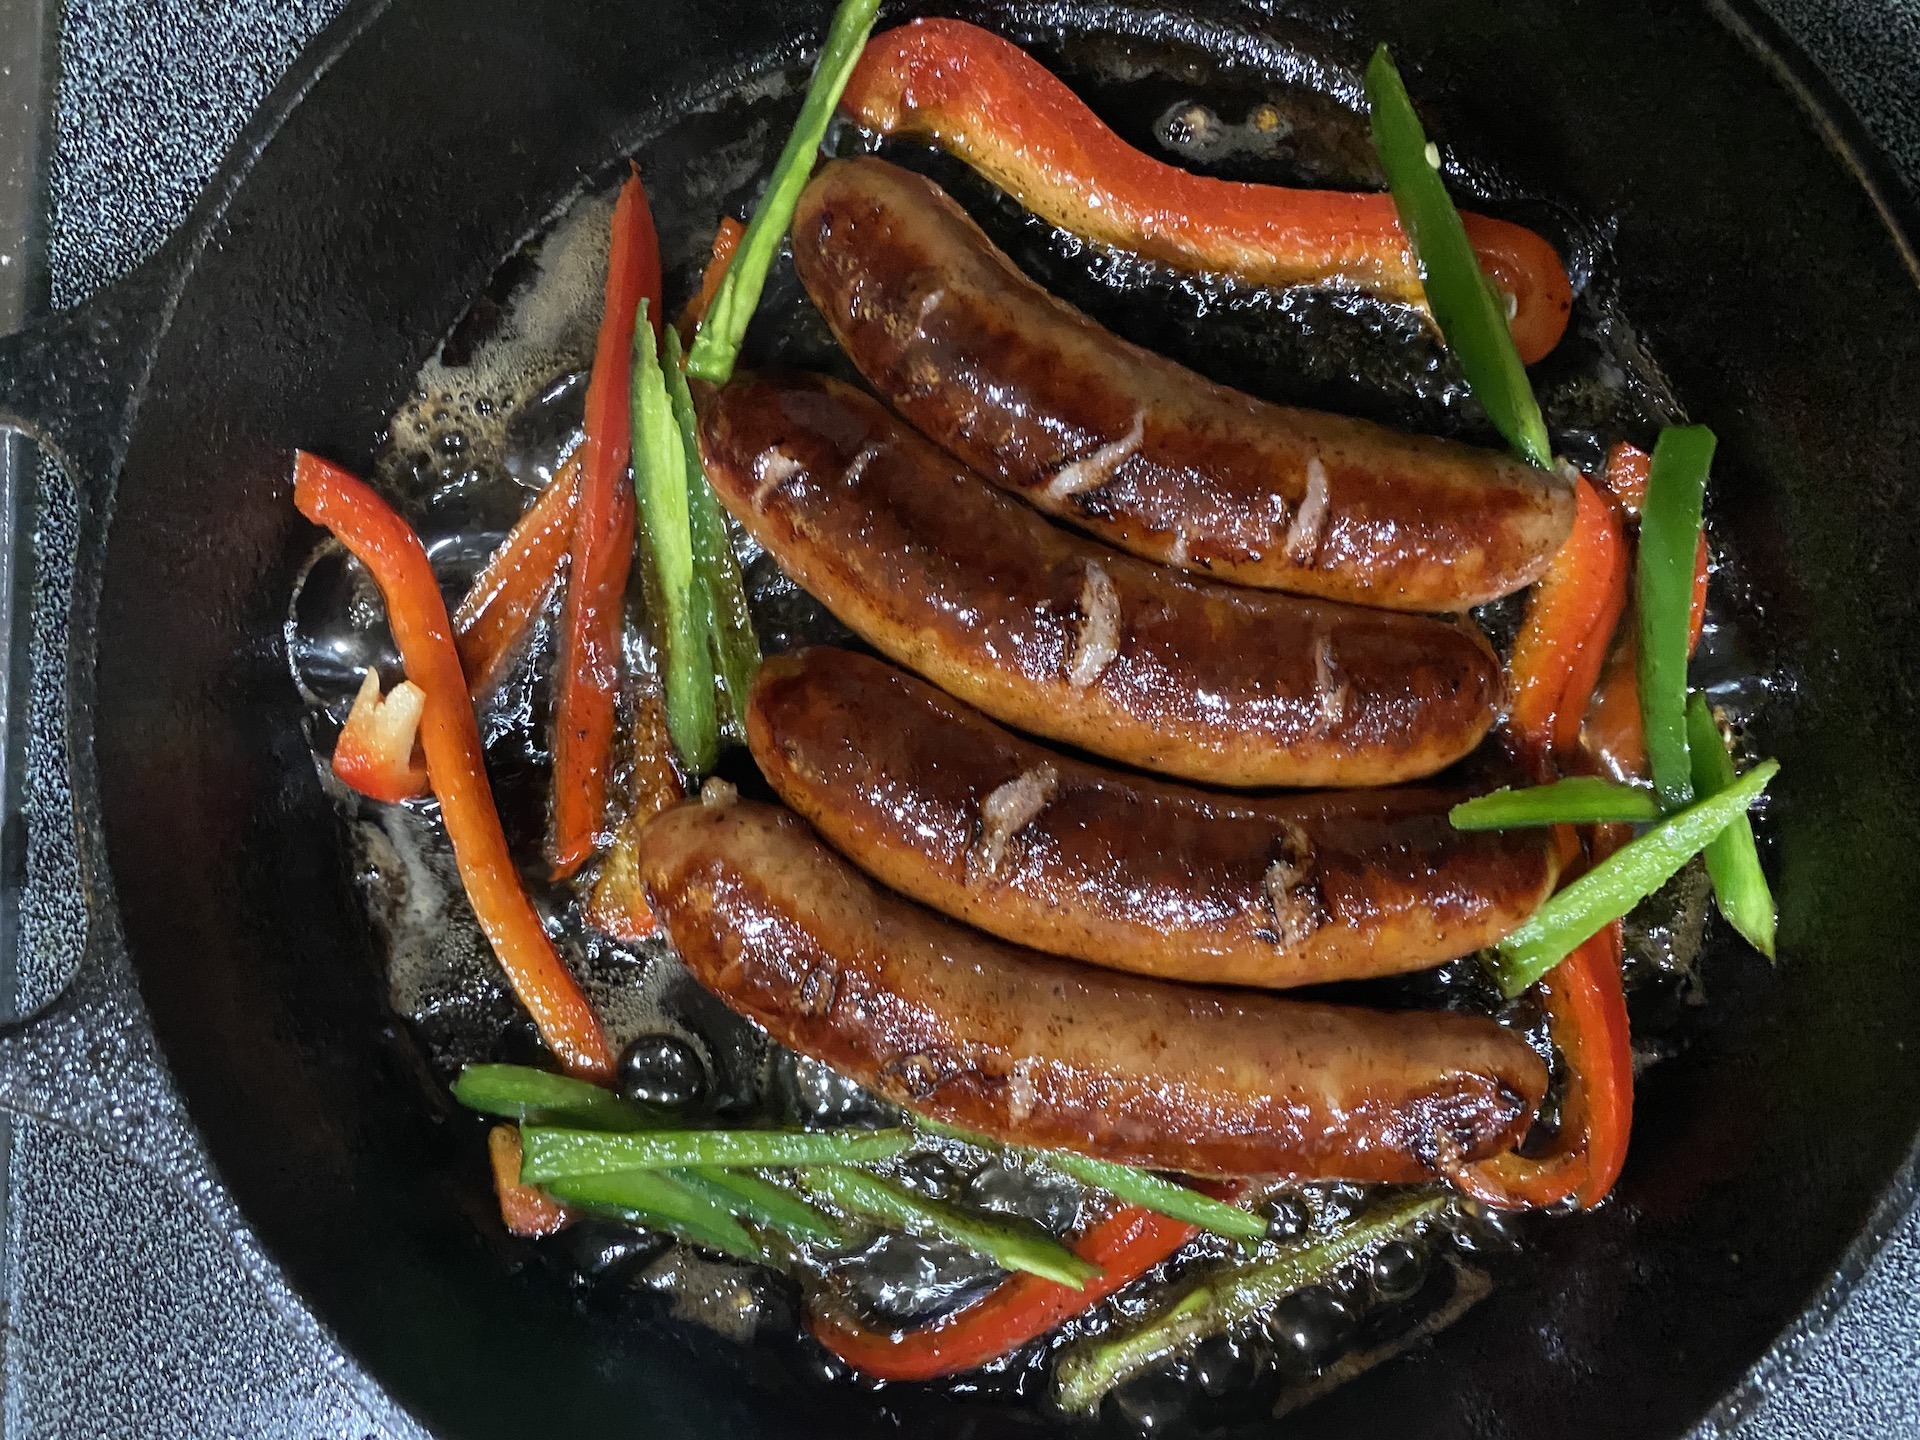 How To Cook Bratwurst On Stove | Inspire • Travel • Eat